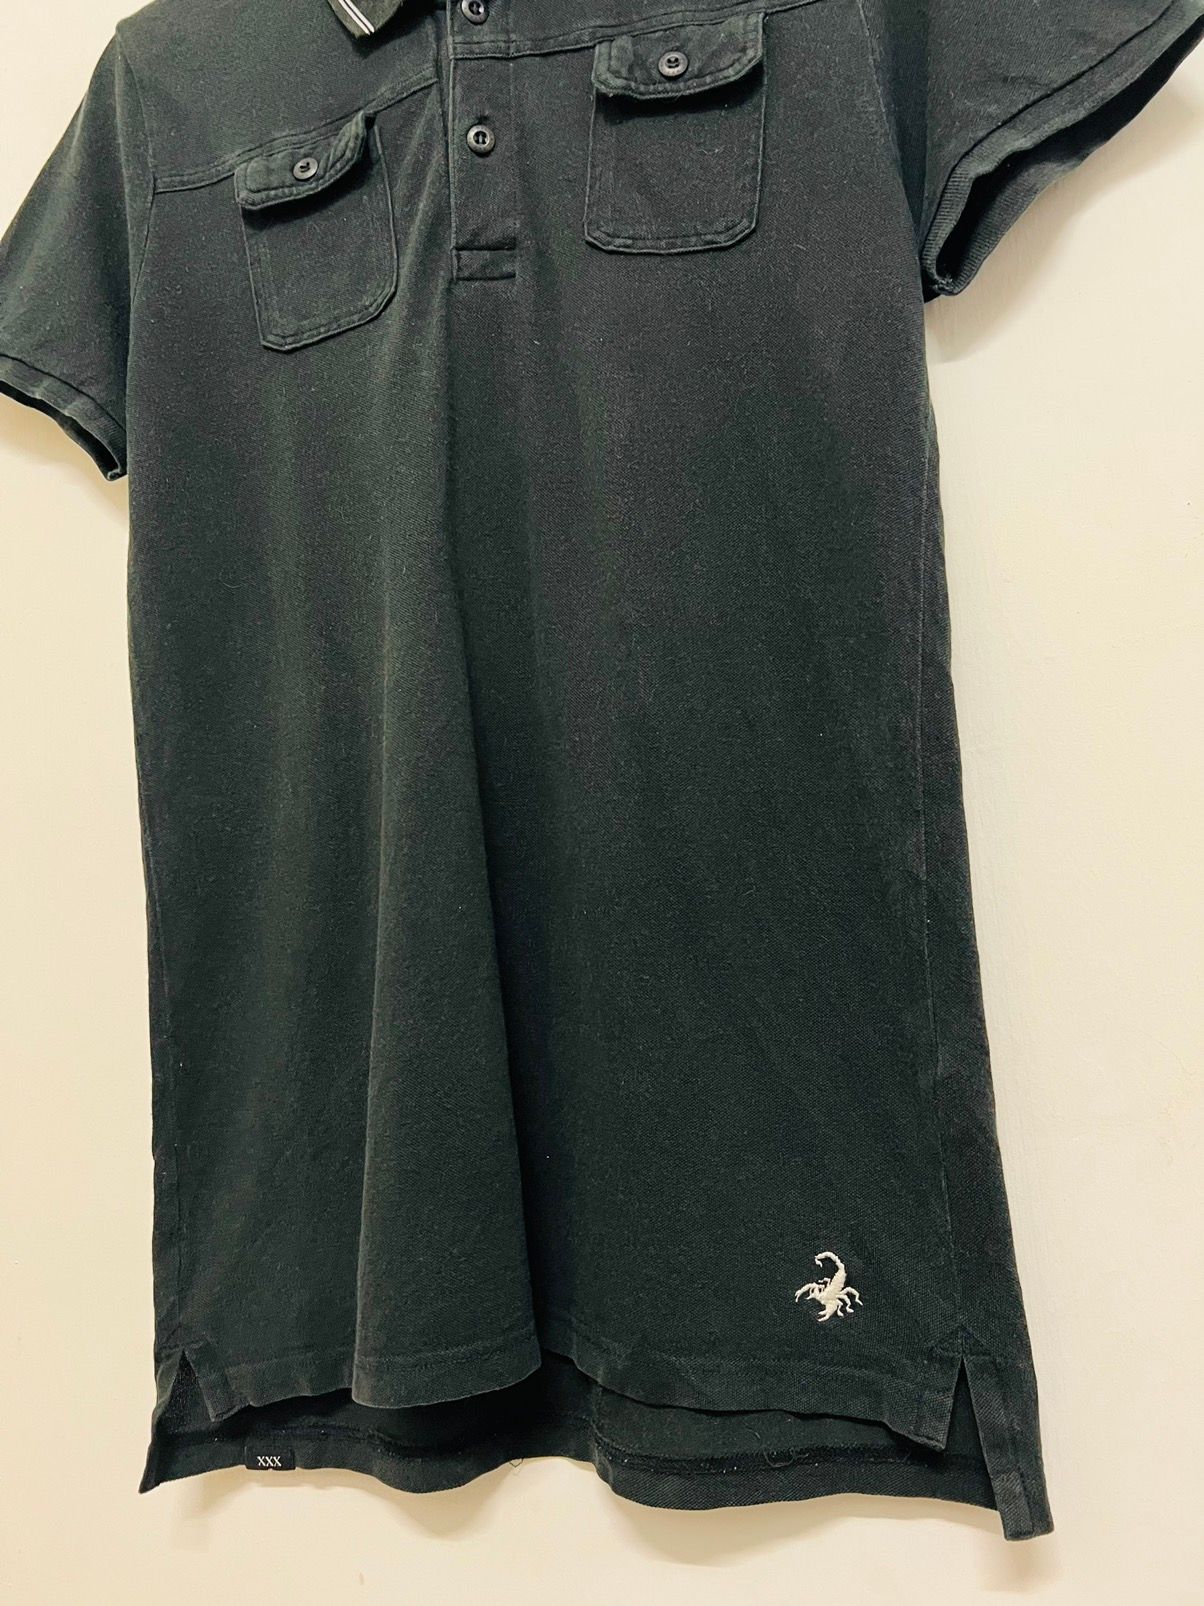 Hysteric Glamour Polo shirt - 4